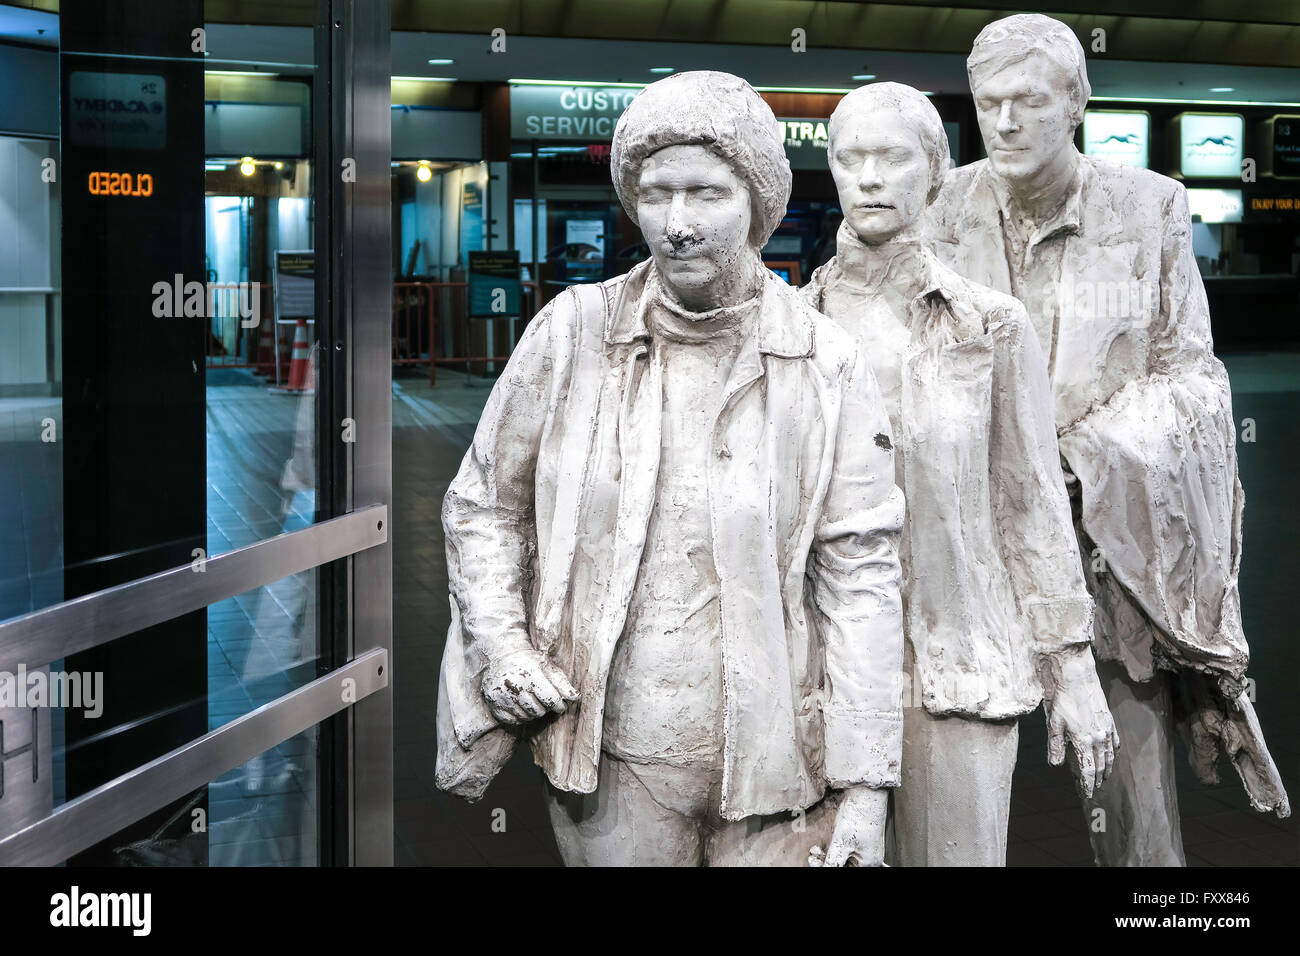 The life-size sculpture of three travelers in line at a boarding gate is on permanent exhibit and the artist is George Siegel. Stock Photo